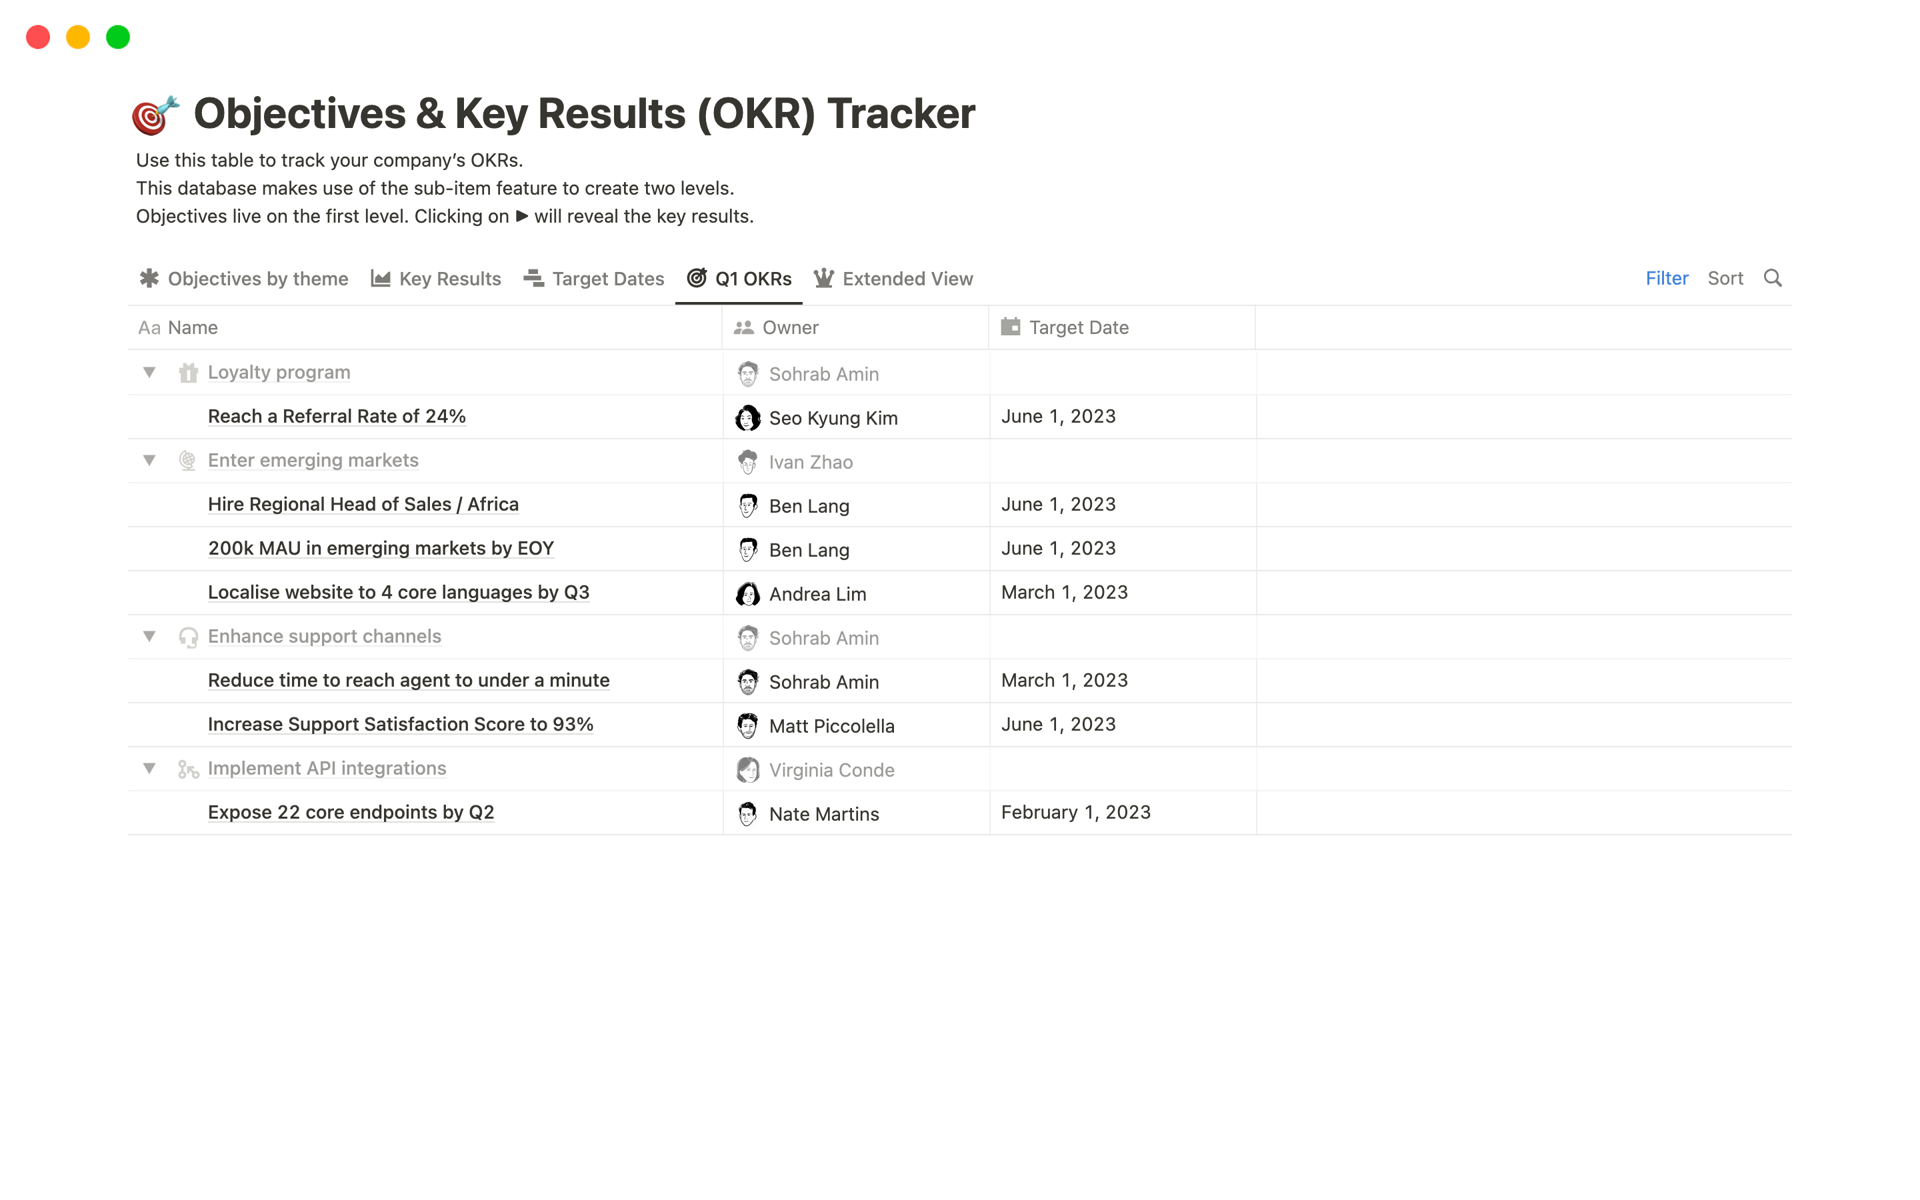 Keep track of your OKRs with status, owner, priority, and timeline details using our Objectives & Key Results Tracker template.